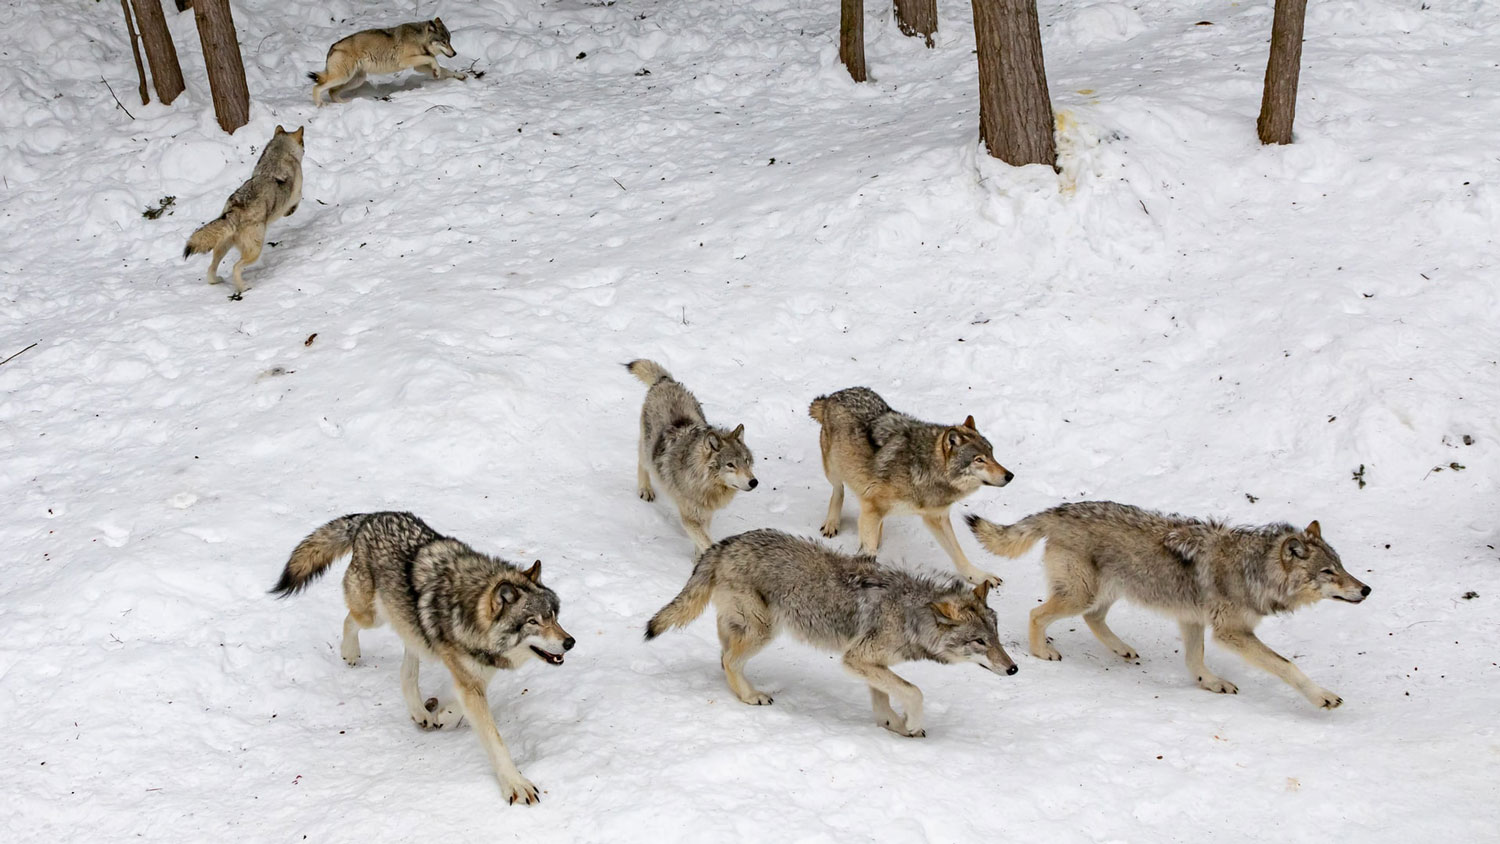 Two Sanctuaries are Offering Up-close and Personal Experiences with Friendly Wolves